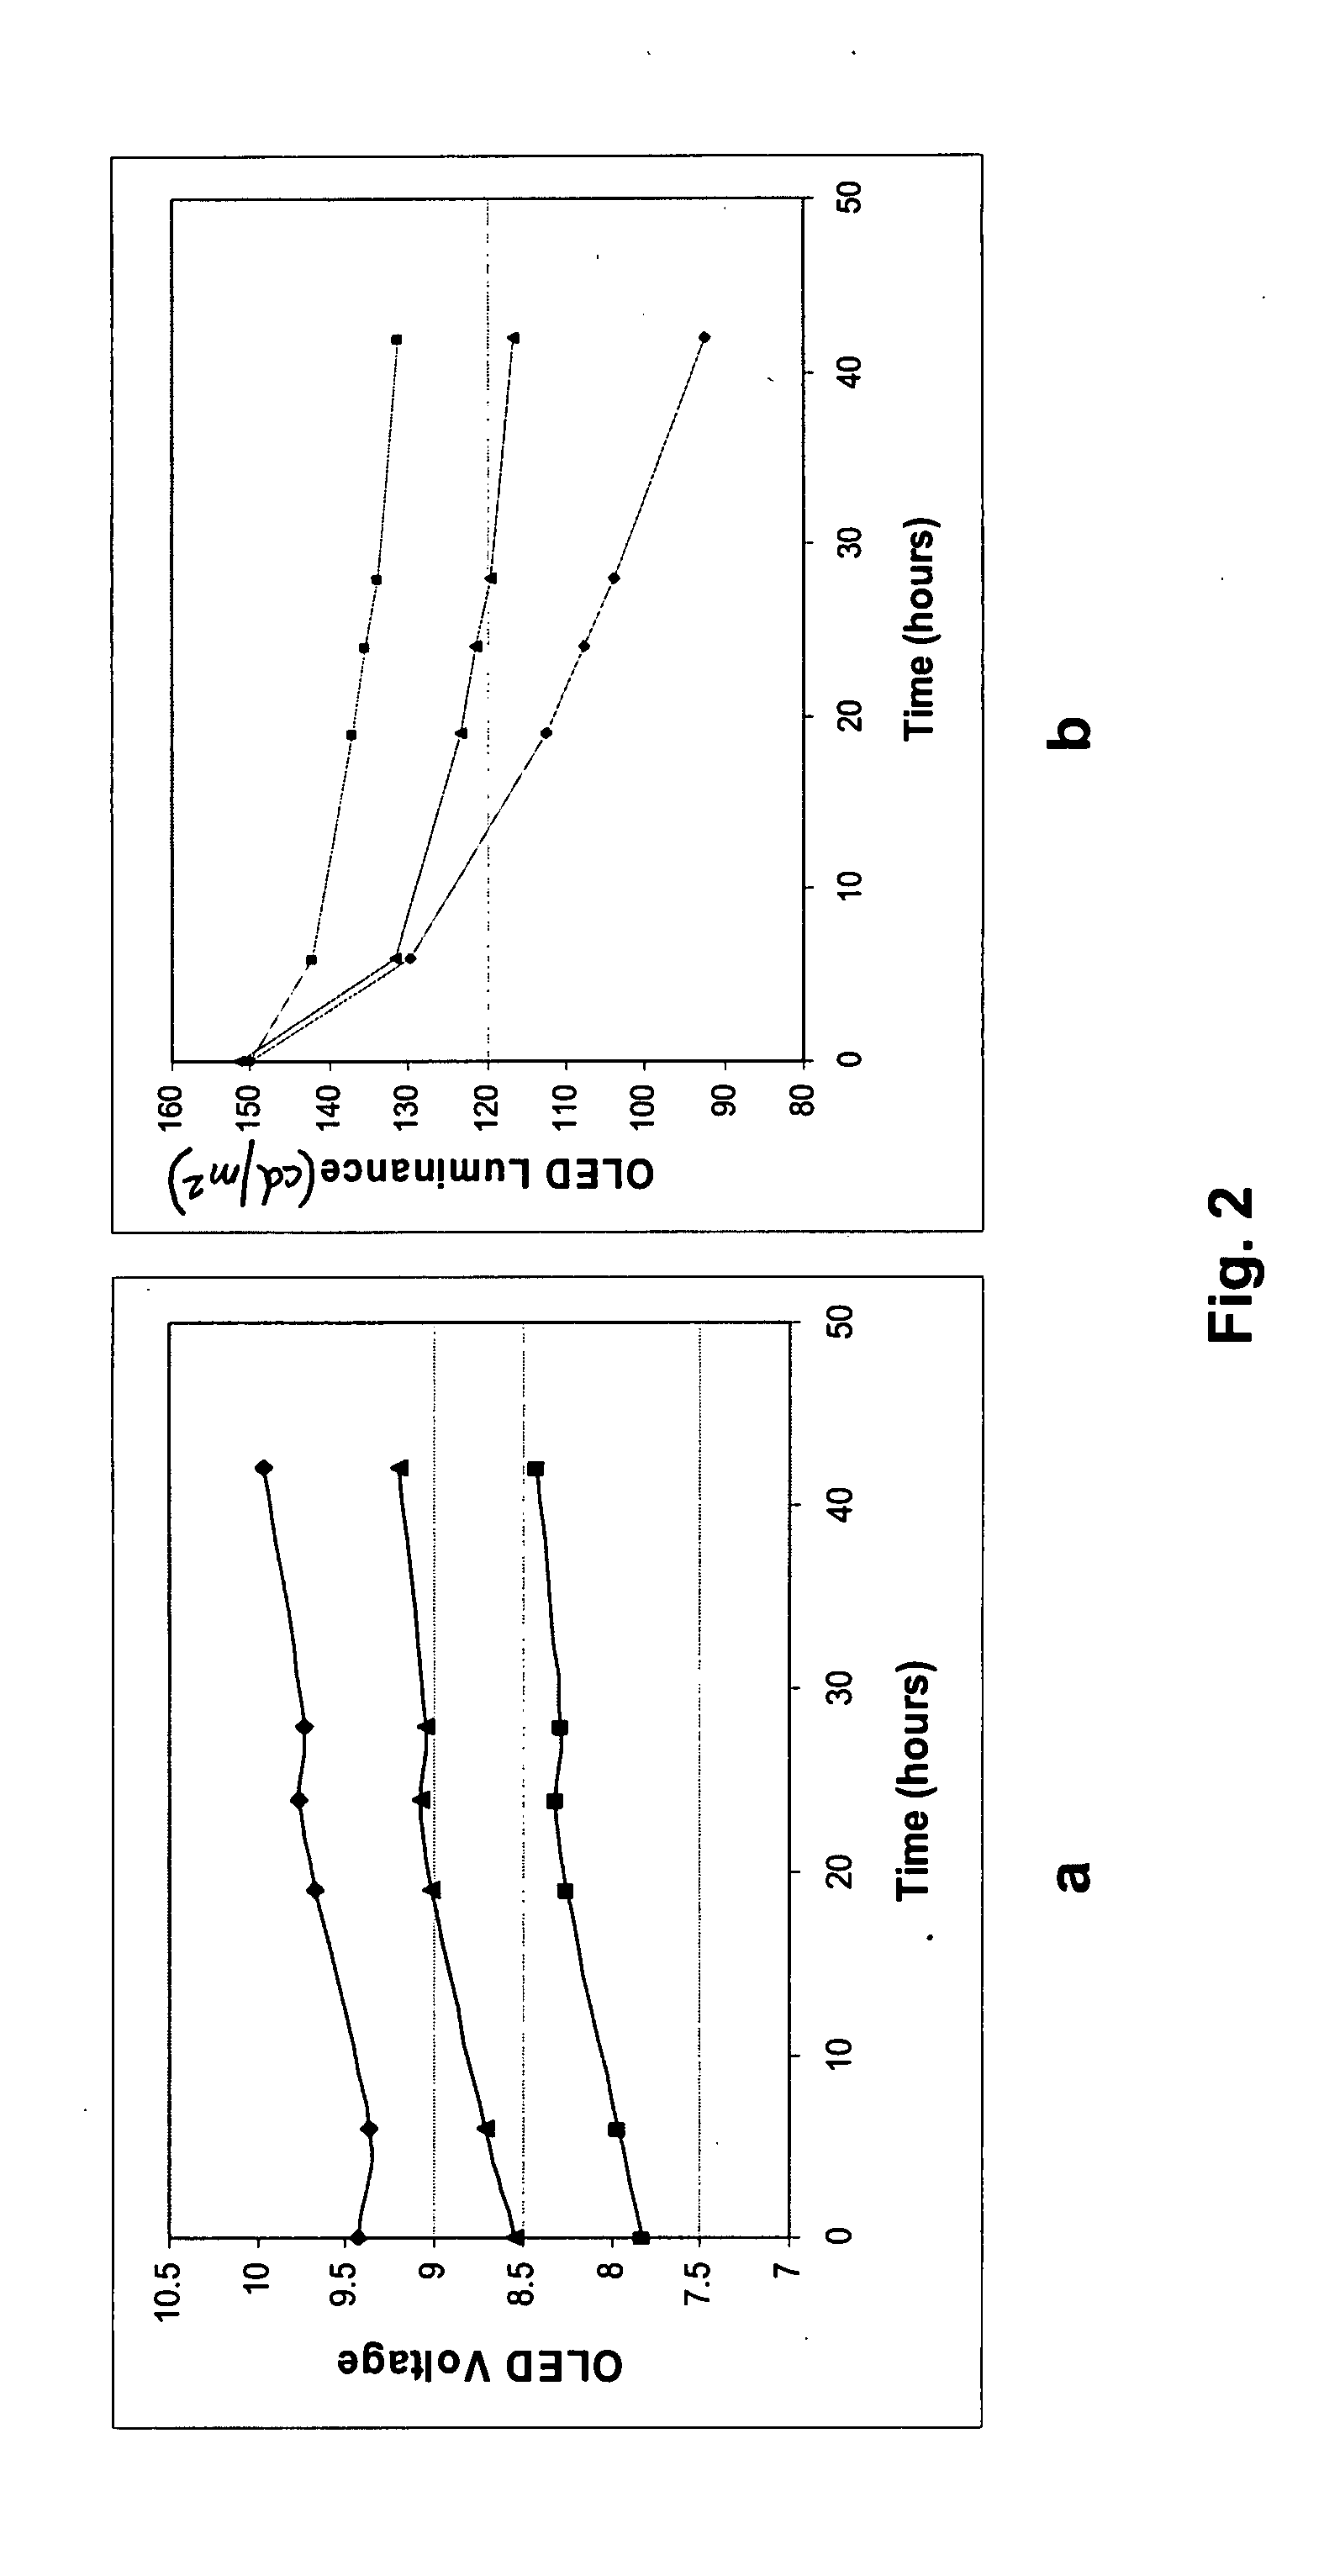 Method and apparatus for managing and uniformly maintaining pixel circuitry in a flat panel display